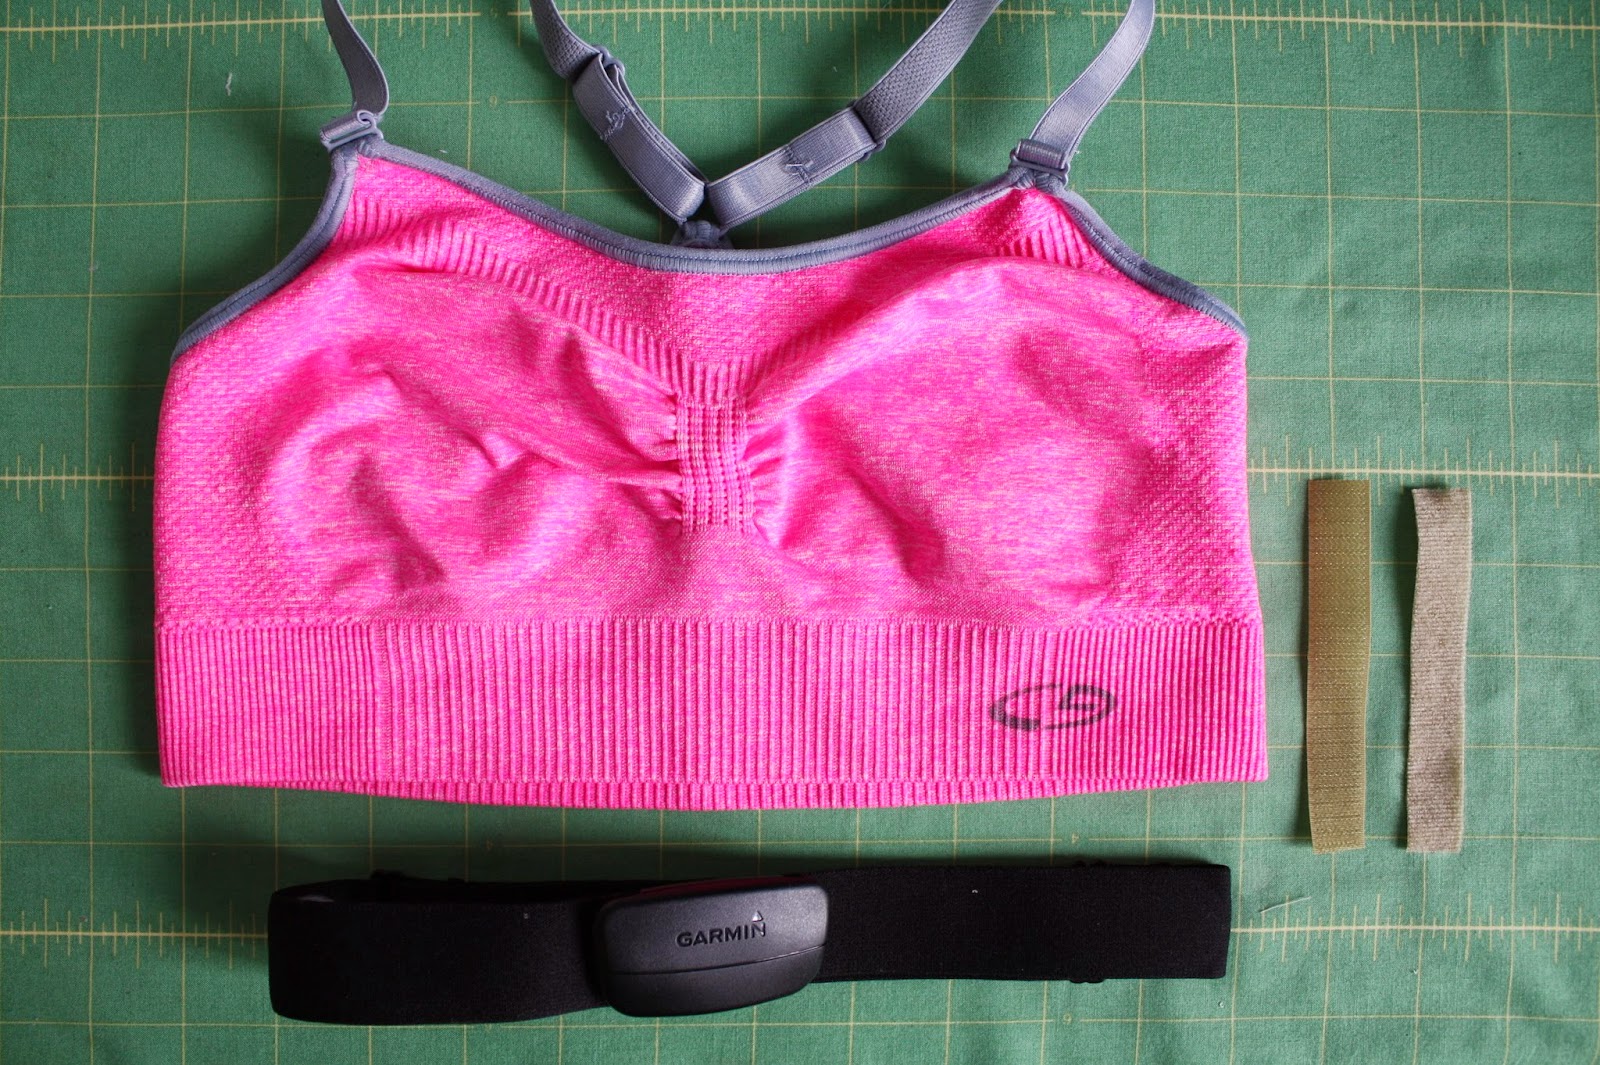 Nicole at Home: Tutorial: Heart rate monitor-sports bra sewing hack